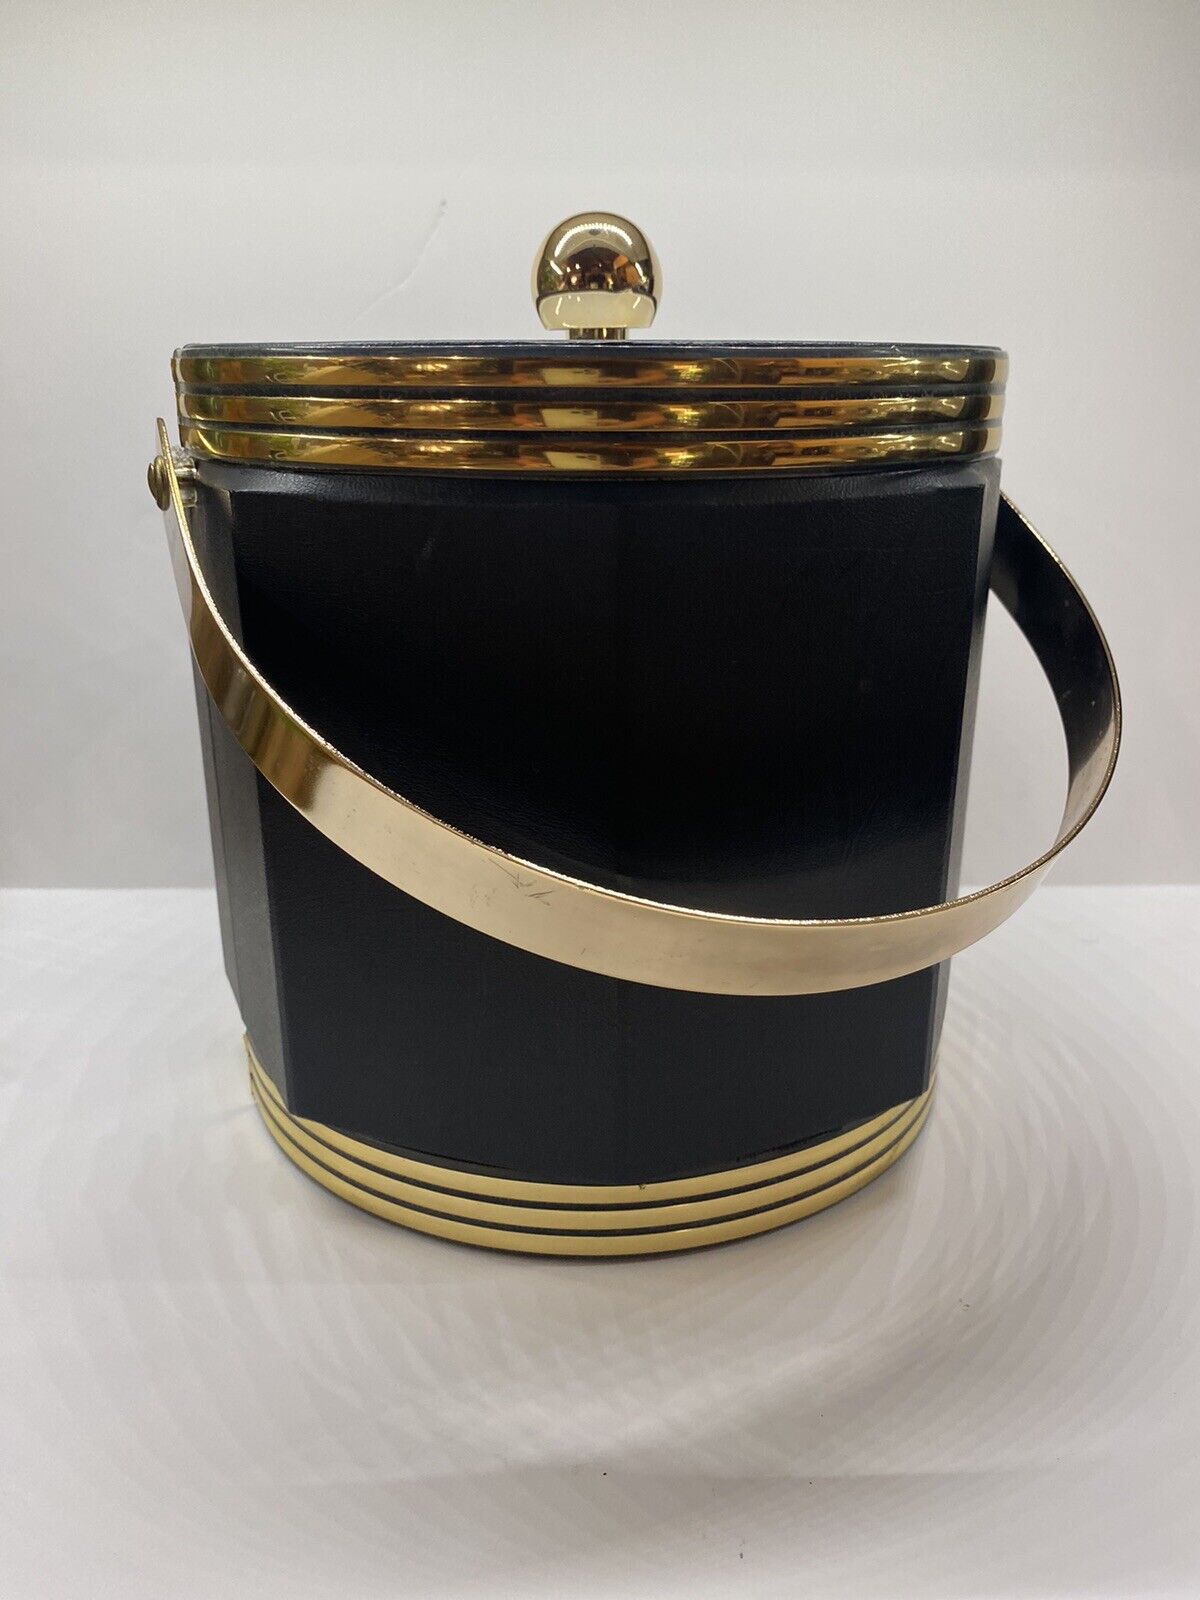 Vintage Black Octagon Ice Bucket Brass Plated Handle New Old Stock with Lid